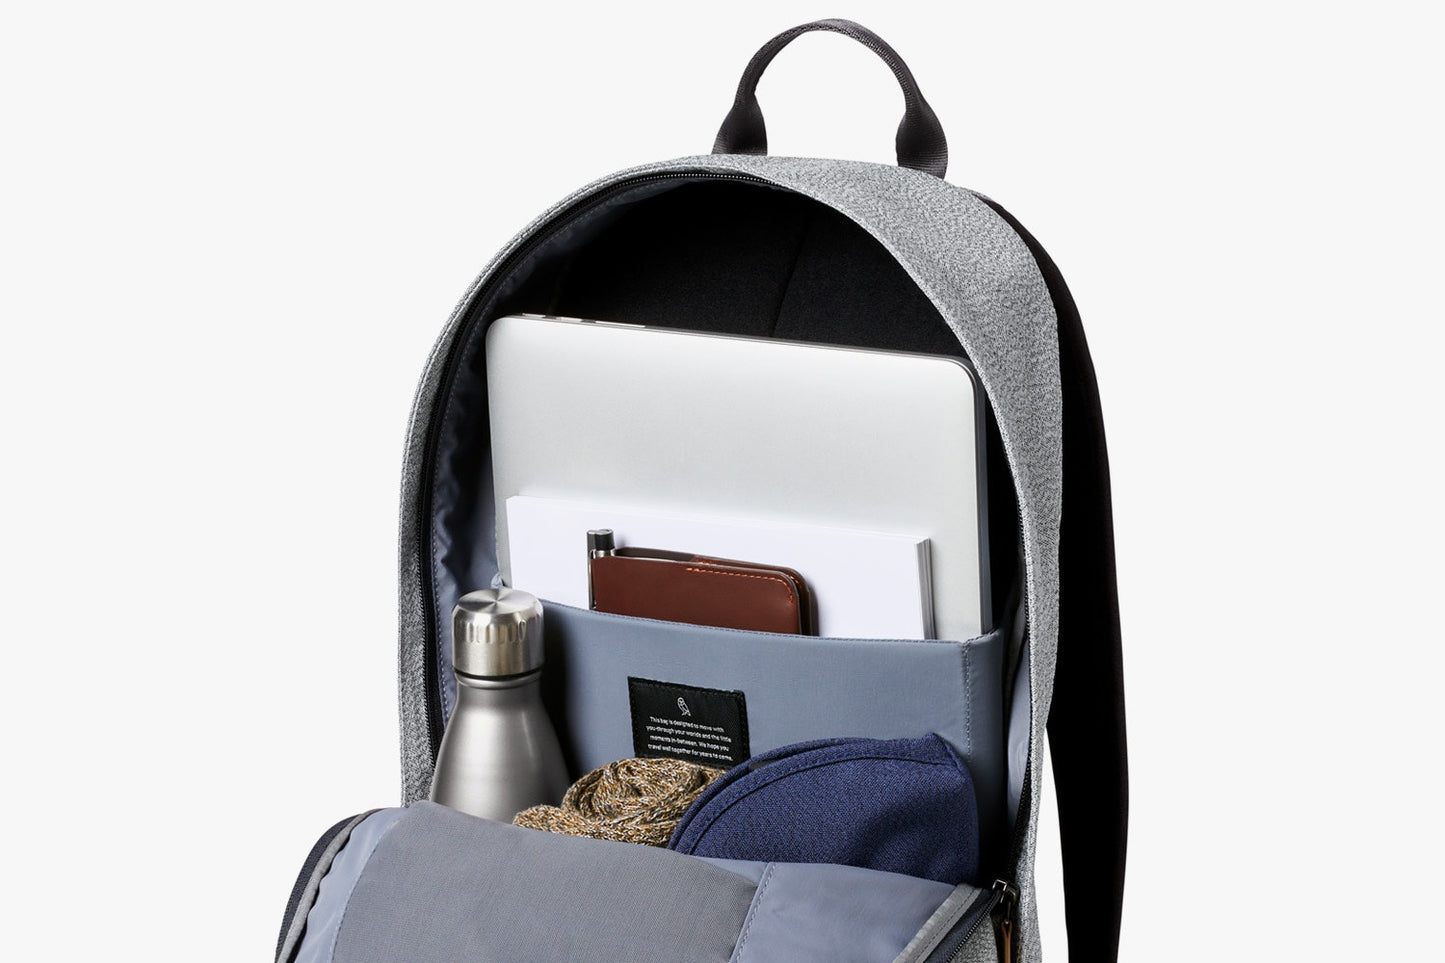 Campus Backpack - BCMA